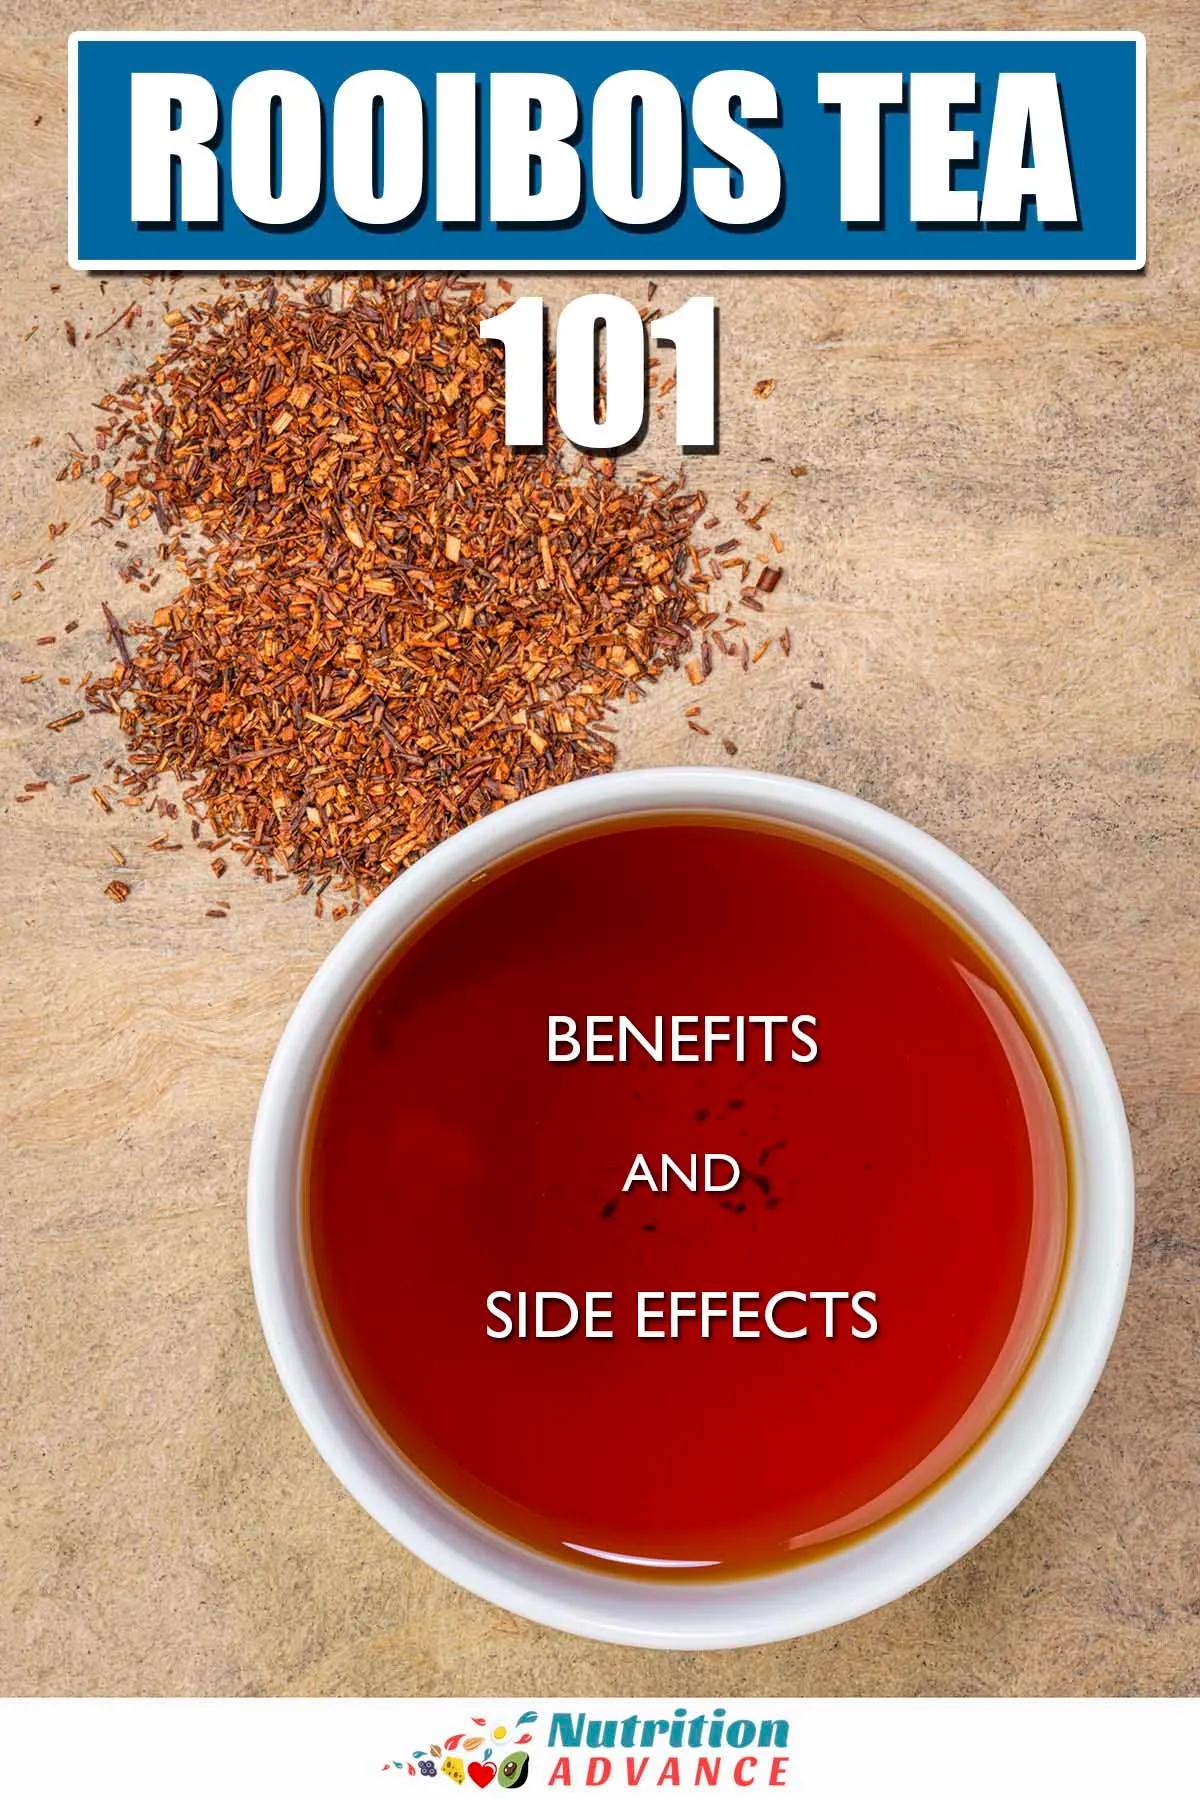 Rooibos Tea 101: Benefits and Side Effects - Nutrition Advance